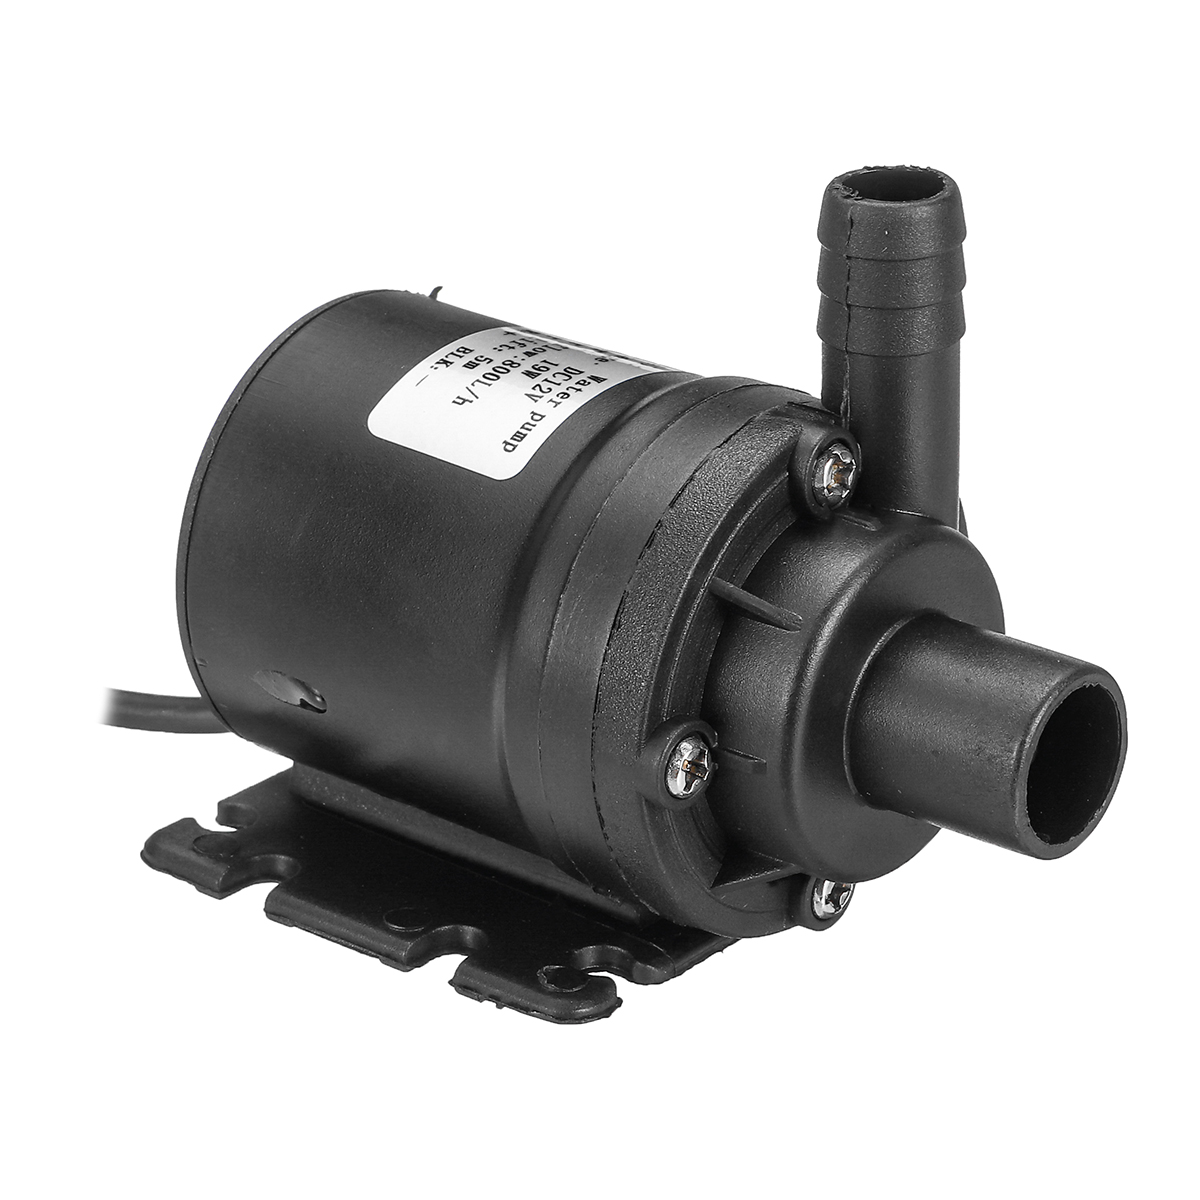 ZYW680-DC-12V-Water-Pump-Ultra-Quiet-Mini-55m-Lift-Brushless-Motor-Submersible-Water-Pump-1531599-7